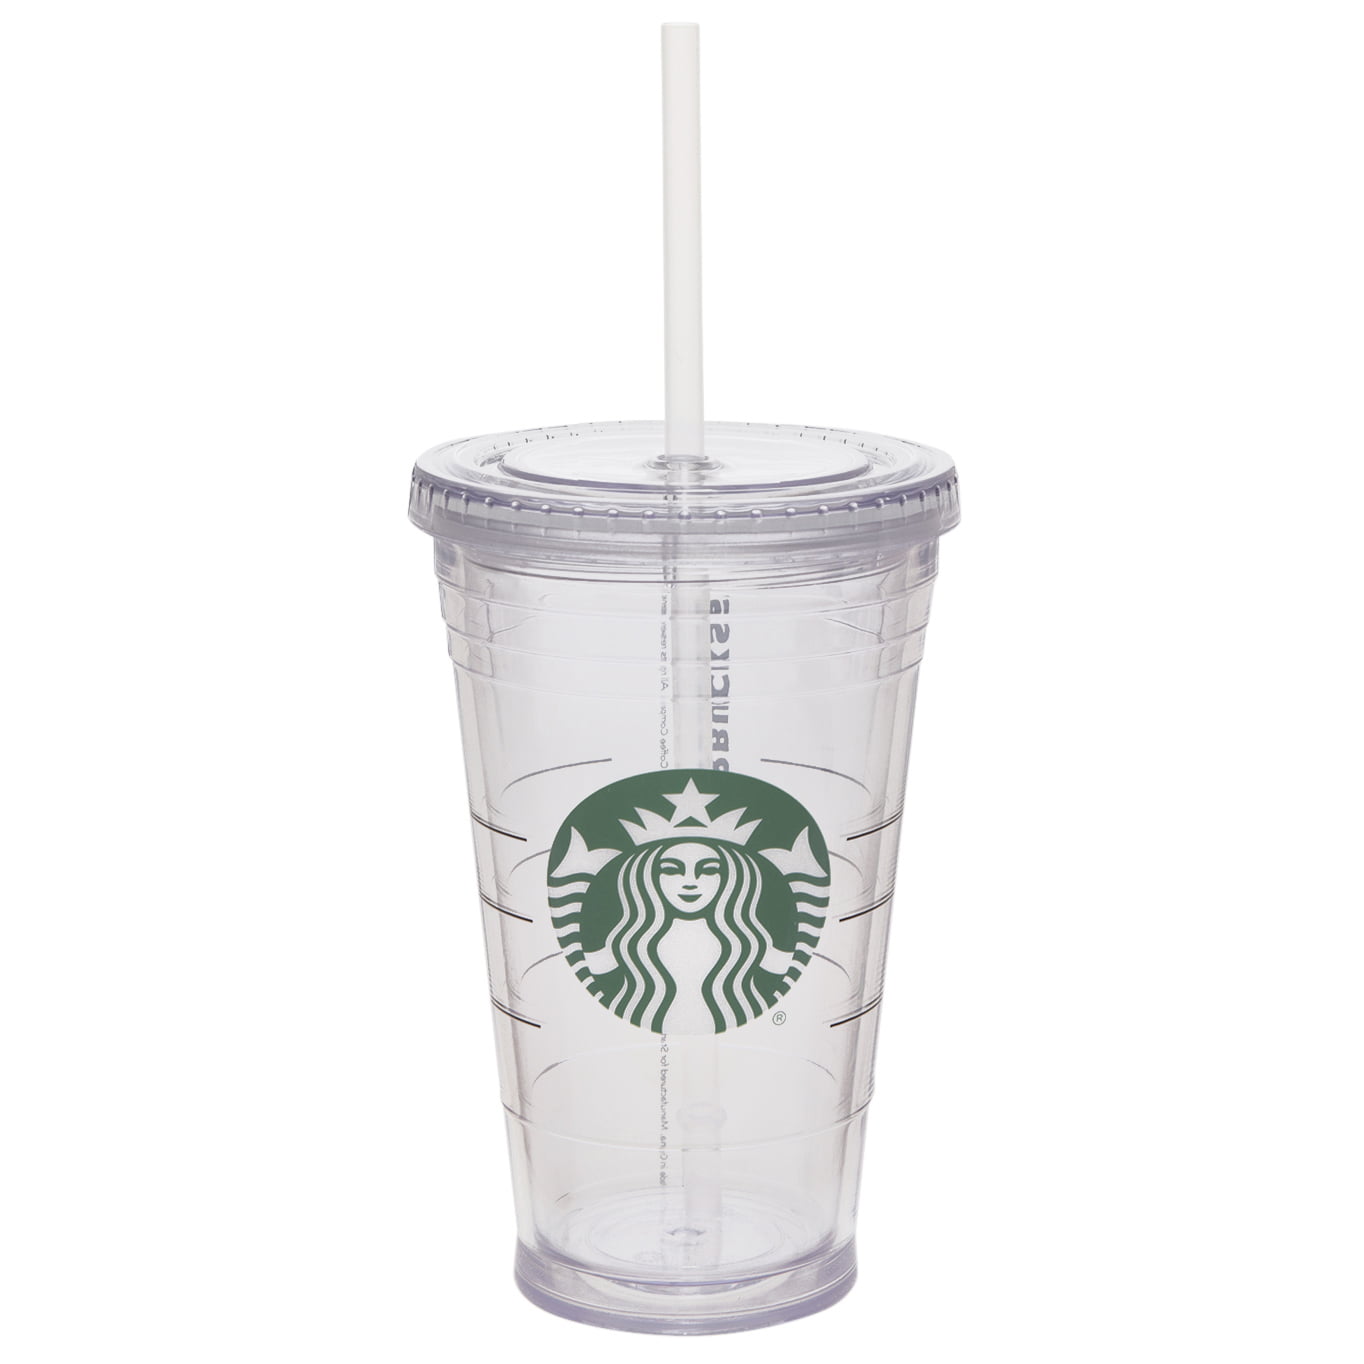 24OZ Transparent Tumblers Plastic Color Changing Juice Reusable Beverage  Starbucks Coffee Cup With Lid And Straw From Angeldh2020, $2.1